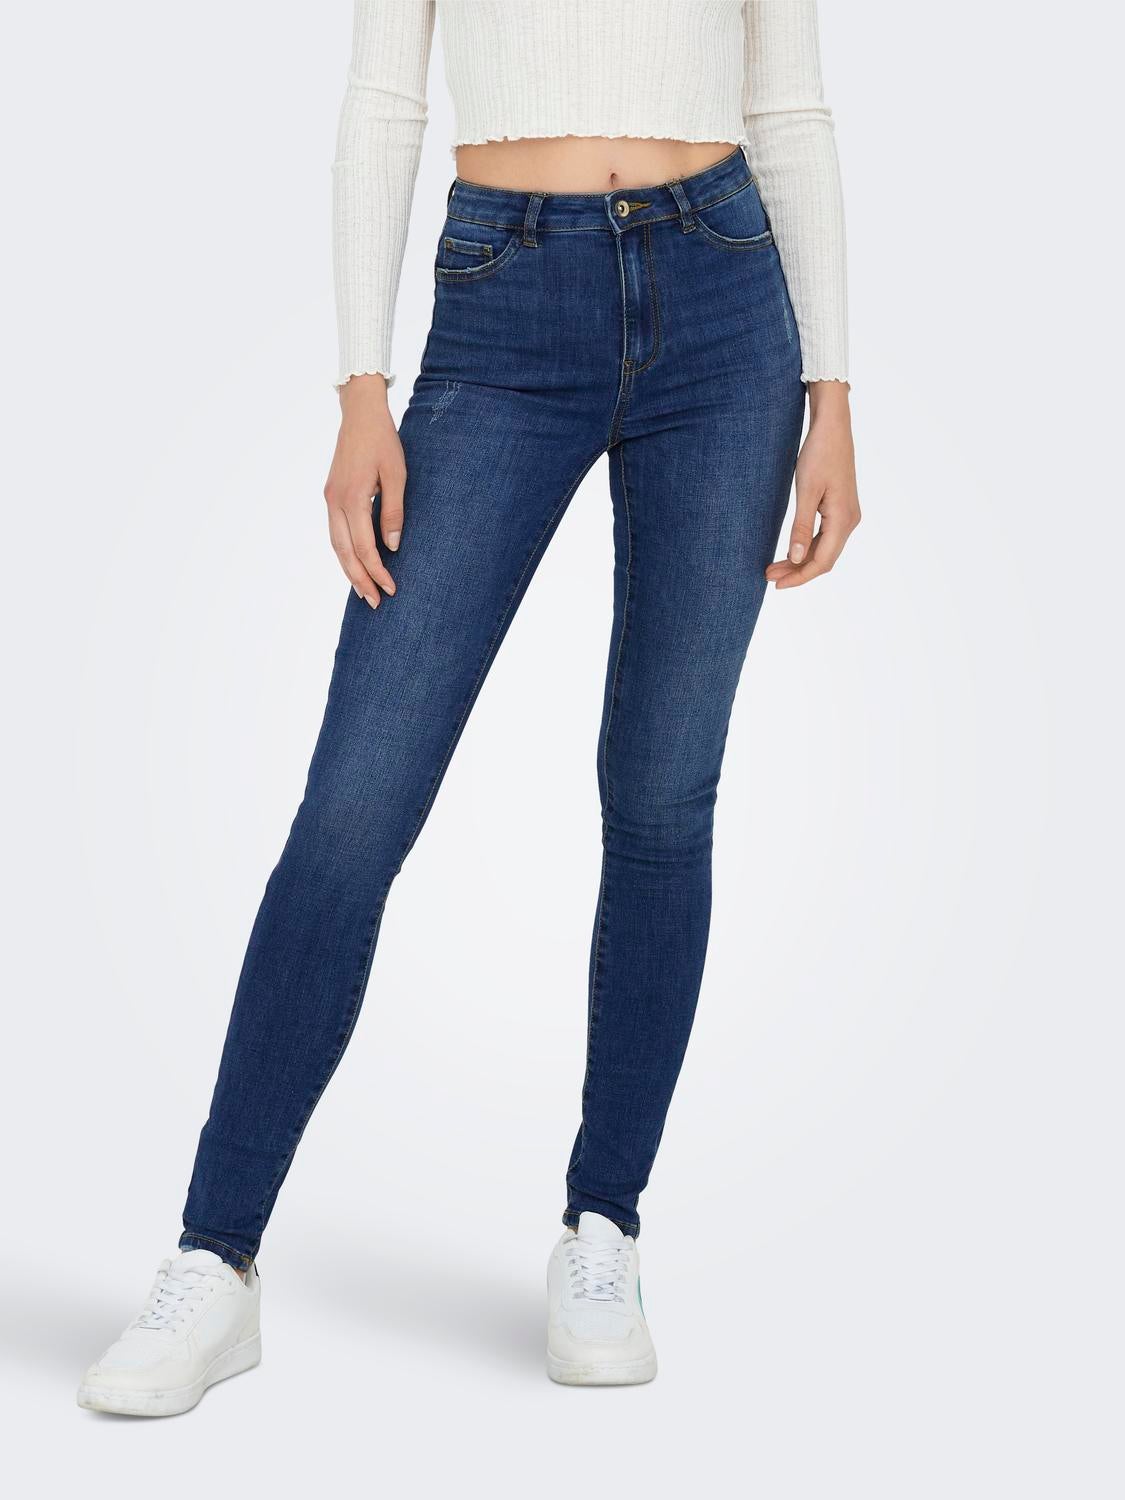 Wax Jeans - Authentic High Waisted Basic Skinny - 90284 - Oly's